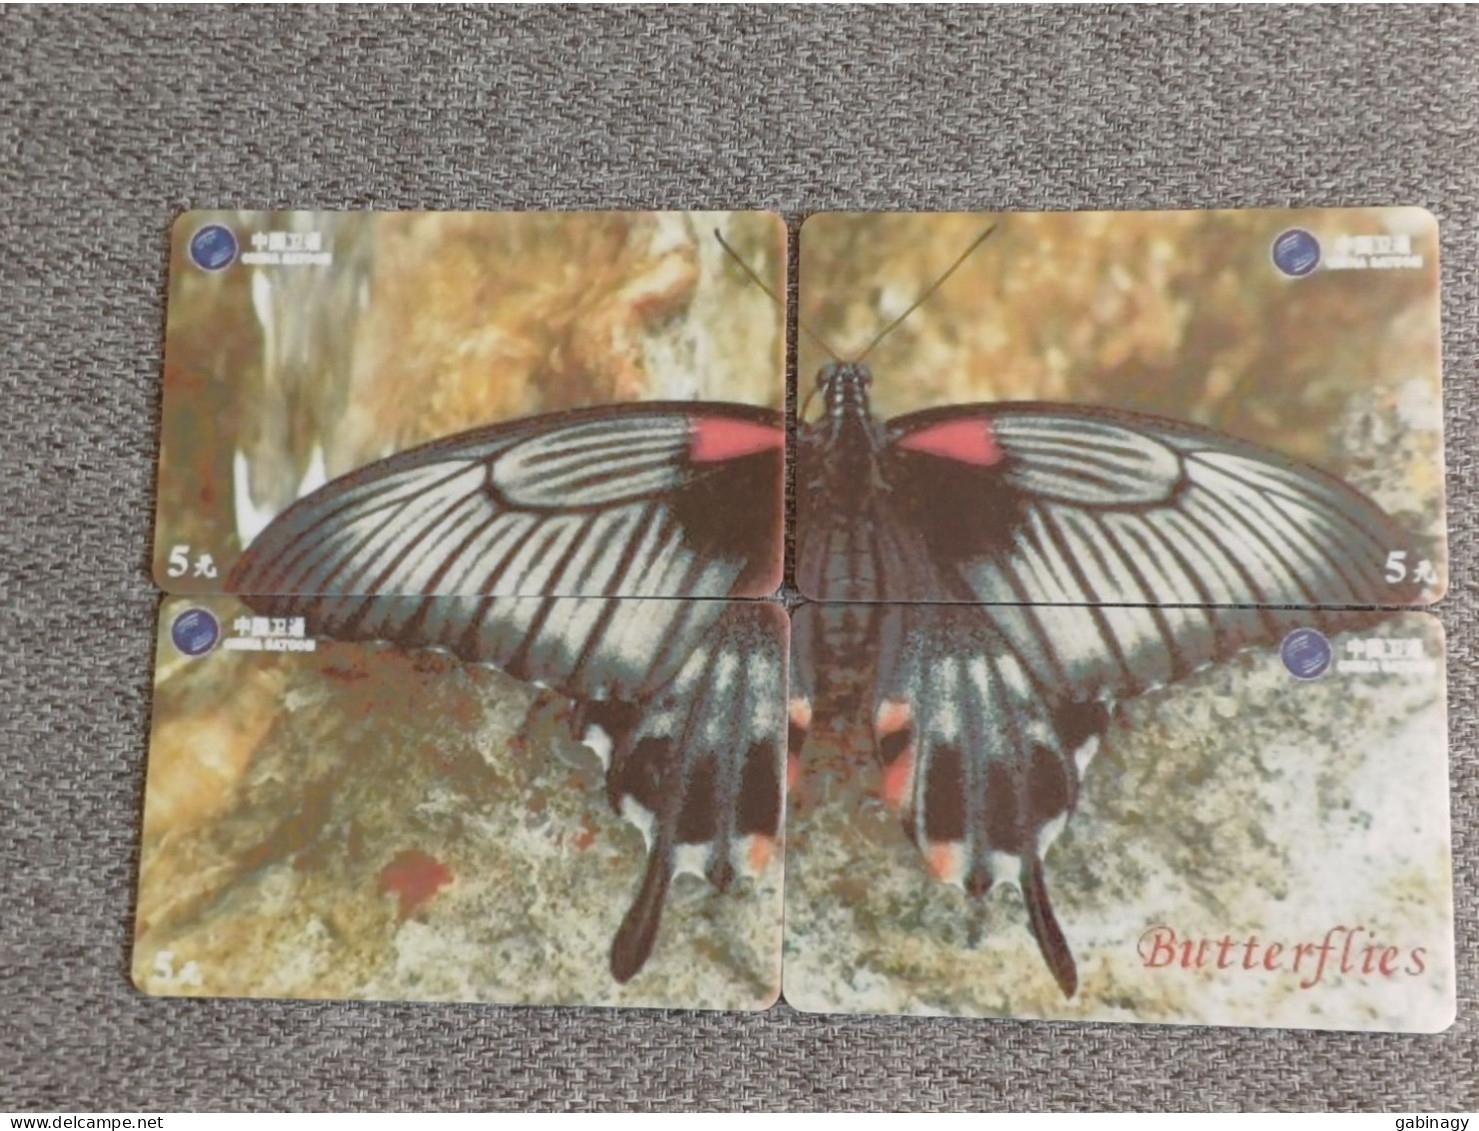 CHINA - BUTTERFLY-03 - PUZZLE SET OF 4 CARDS - China